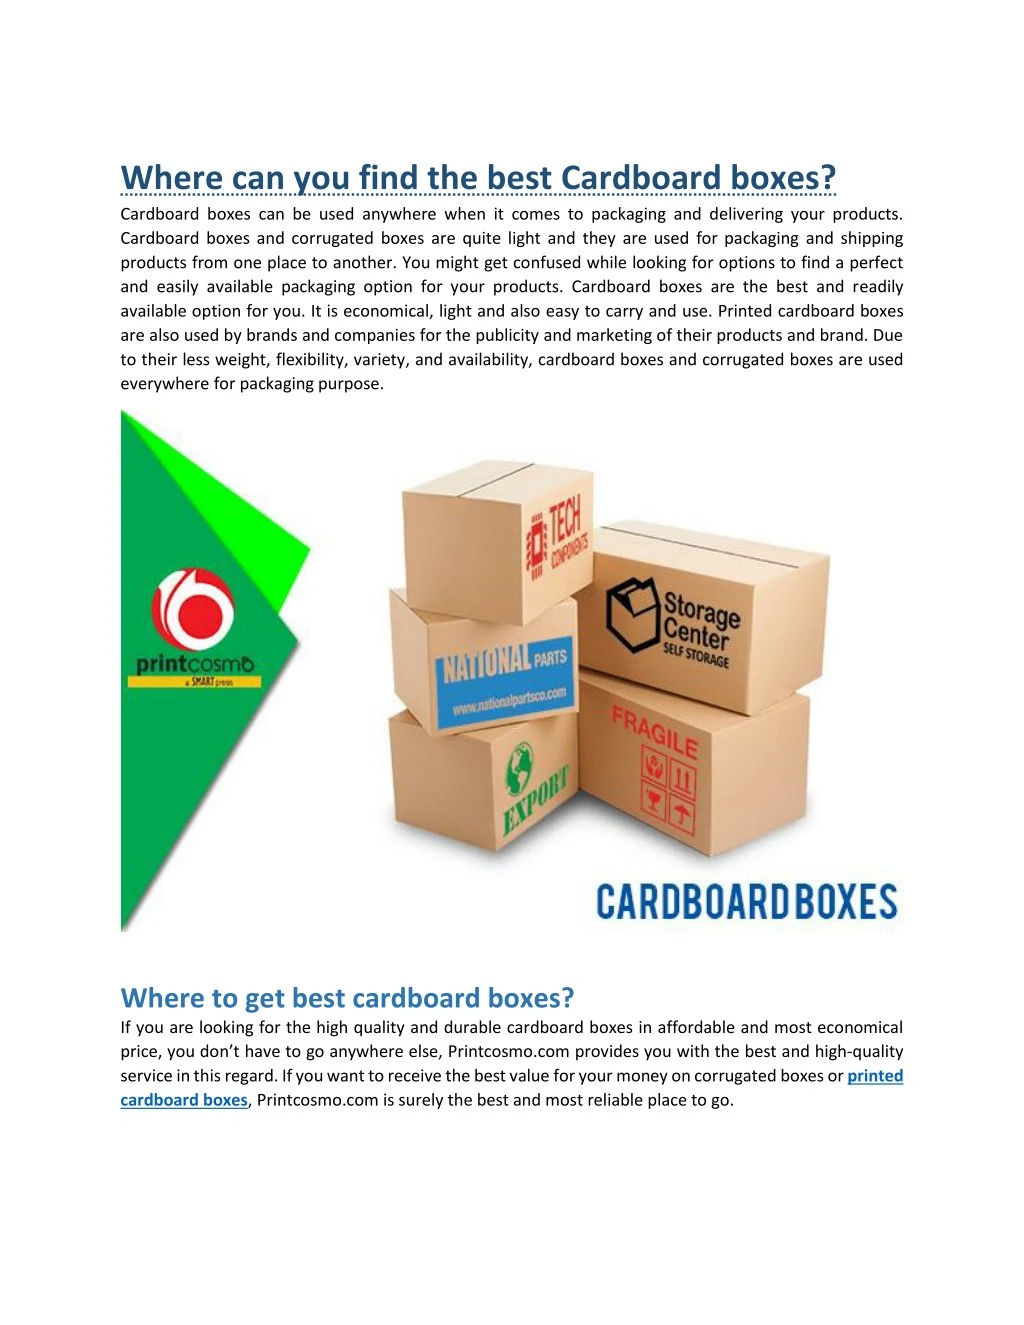 where can you find the best cardboard boxes